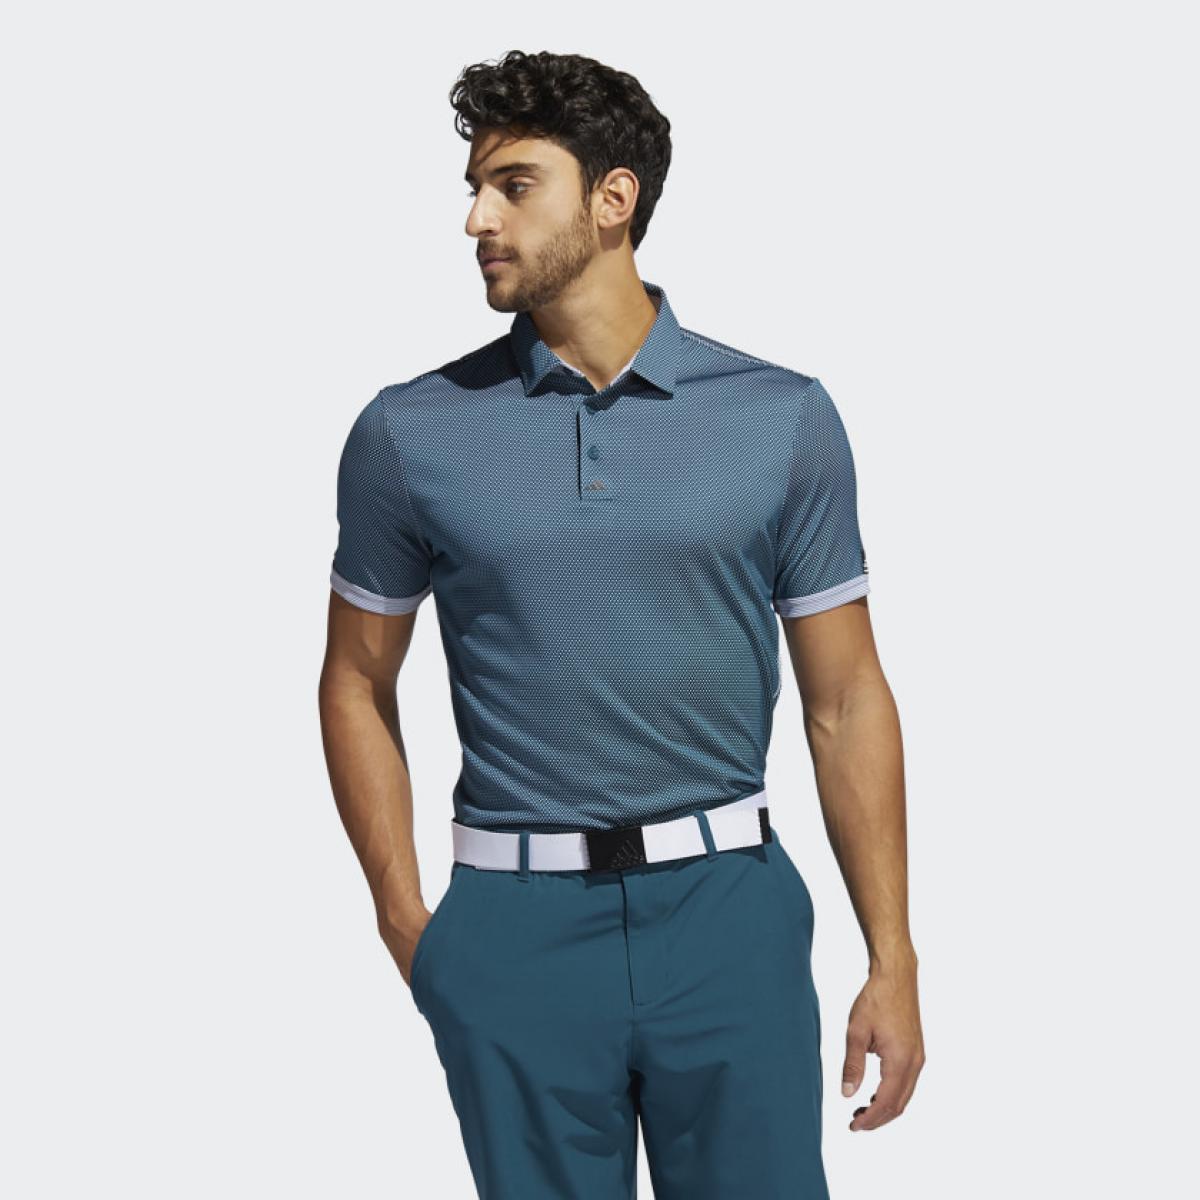 This adidas golf polo shirt combines a classic look with modern performance to keep you splitting fairways in comfort and style. Crouch, bend and rotate naturally as you follow through on every shot. Then head for the clubhouse feeling as fresh as you did